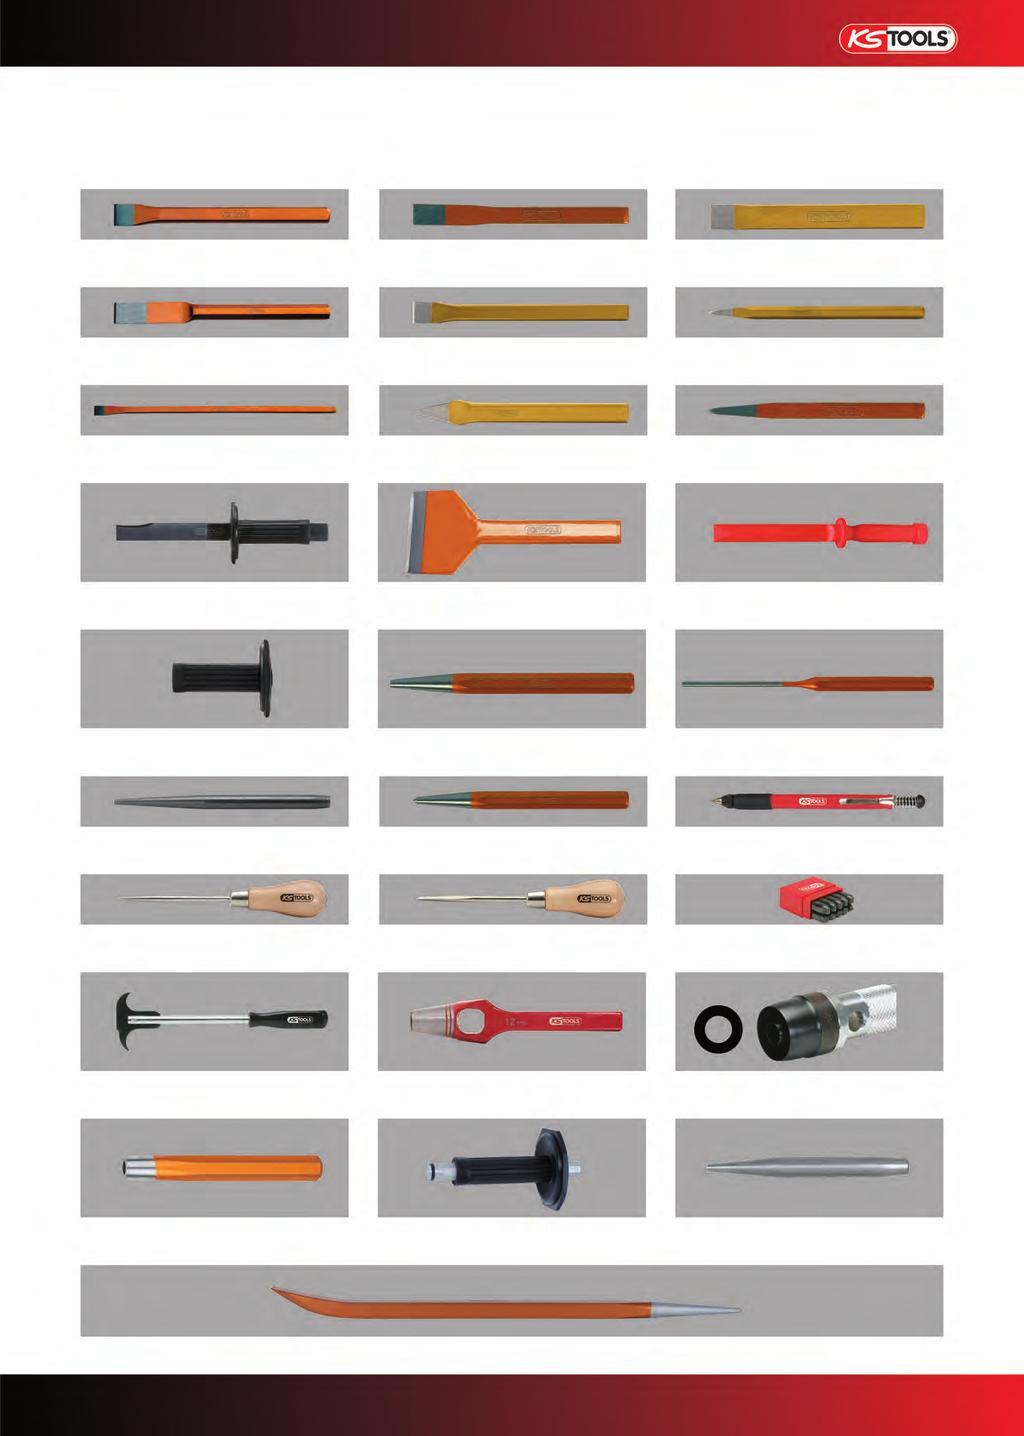 Chisel and punch lines Flat chisel Tilers flat chise Slitting chisel Jointing chisel Bricklayers chisel Pointed chisel Electrians chisel Cross chisel Tilers pointed chisel Bodywork slitting chisel